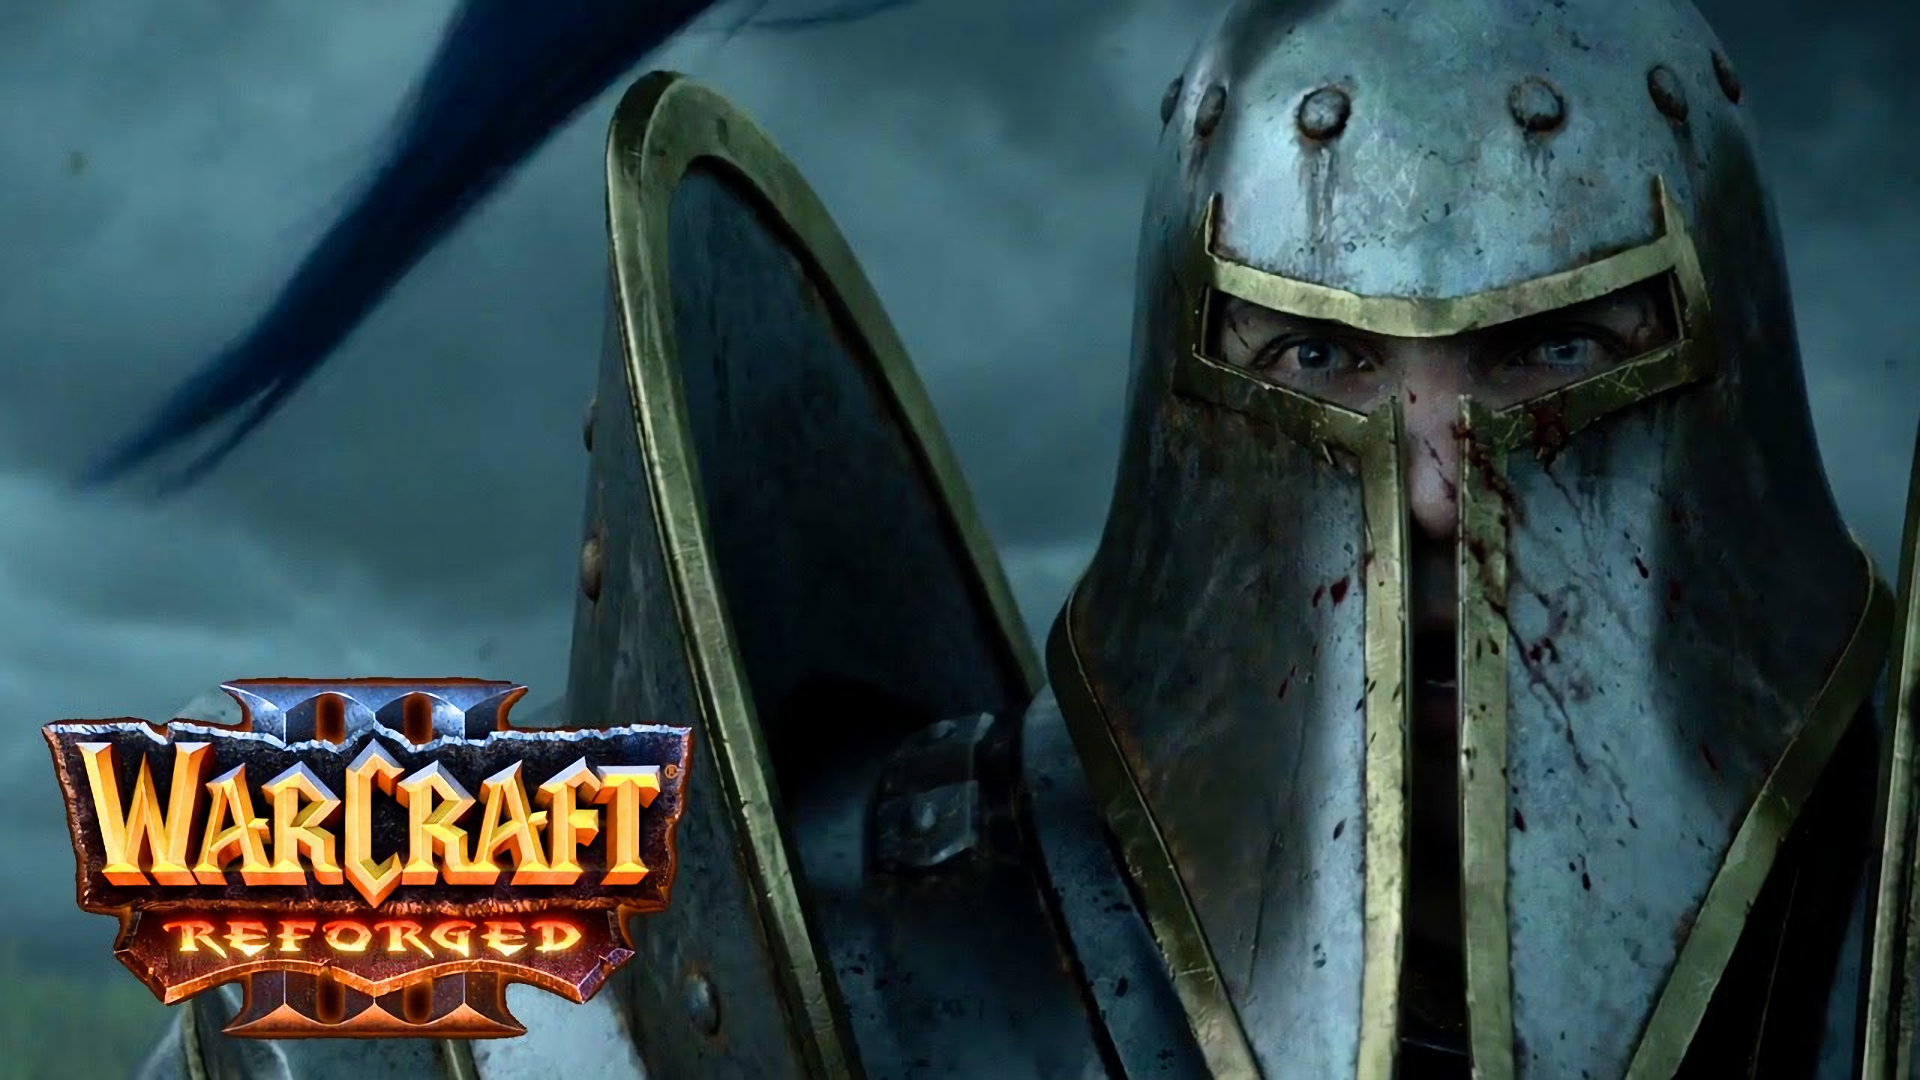 HD desktop wallpaper of Warcraft III: Reforged featuring a close-up of a knight in battle armor with intense eyes.